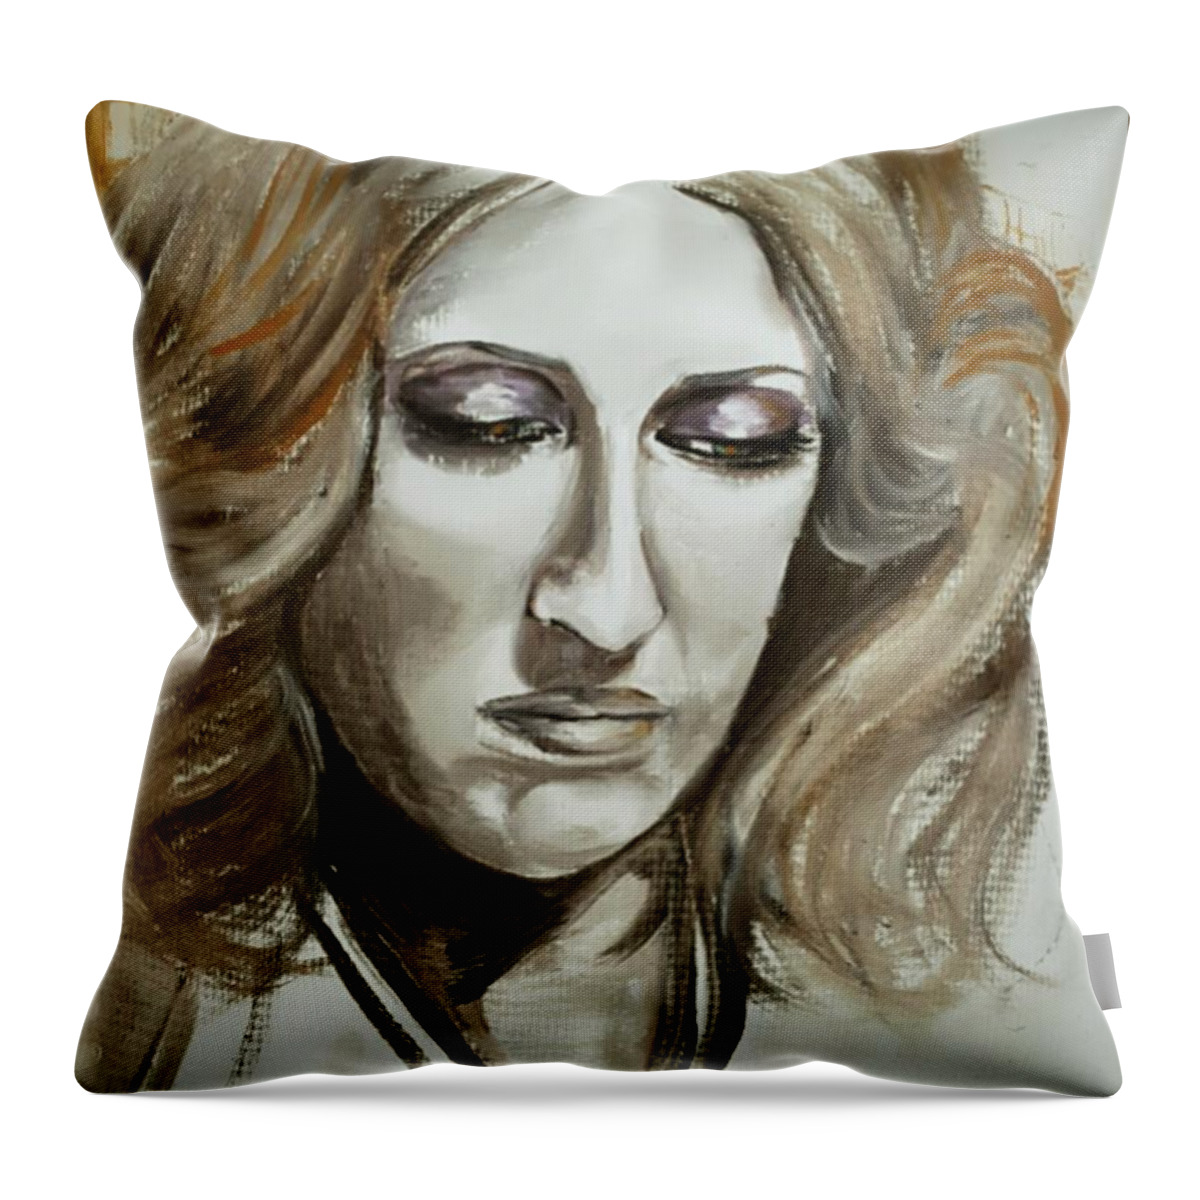 Nostalgia Throw Pillow featuring the painting Remembering San Francisco by Alexandria Weaselwise Busen